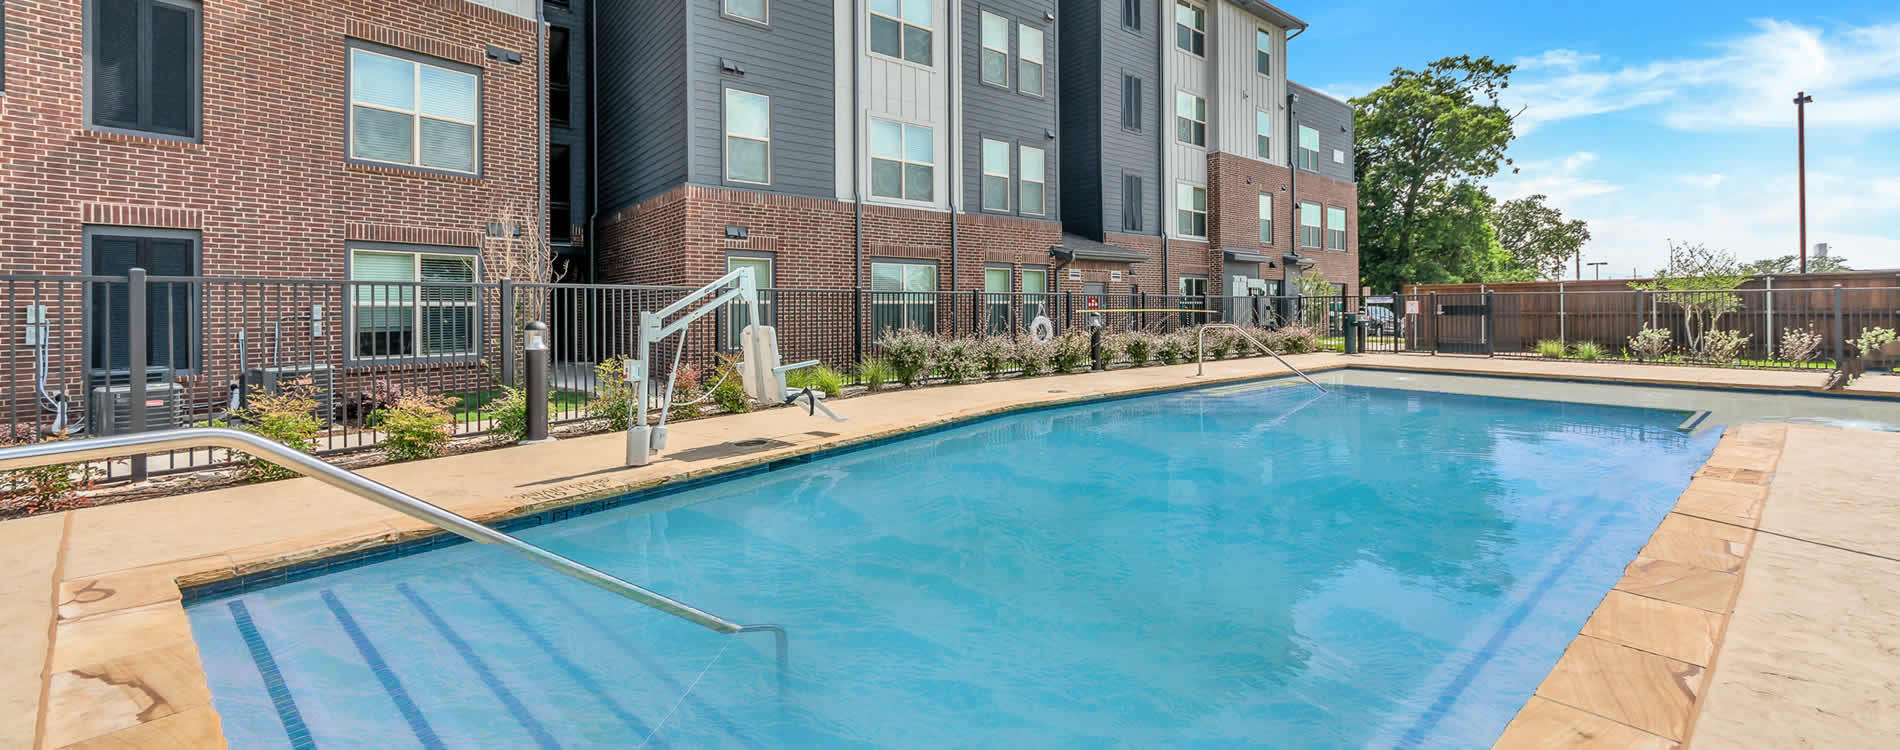 Apartments in Plano, Texas